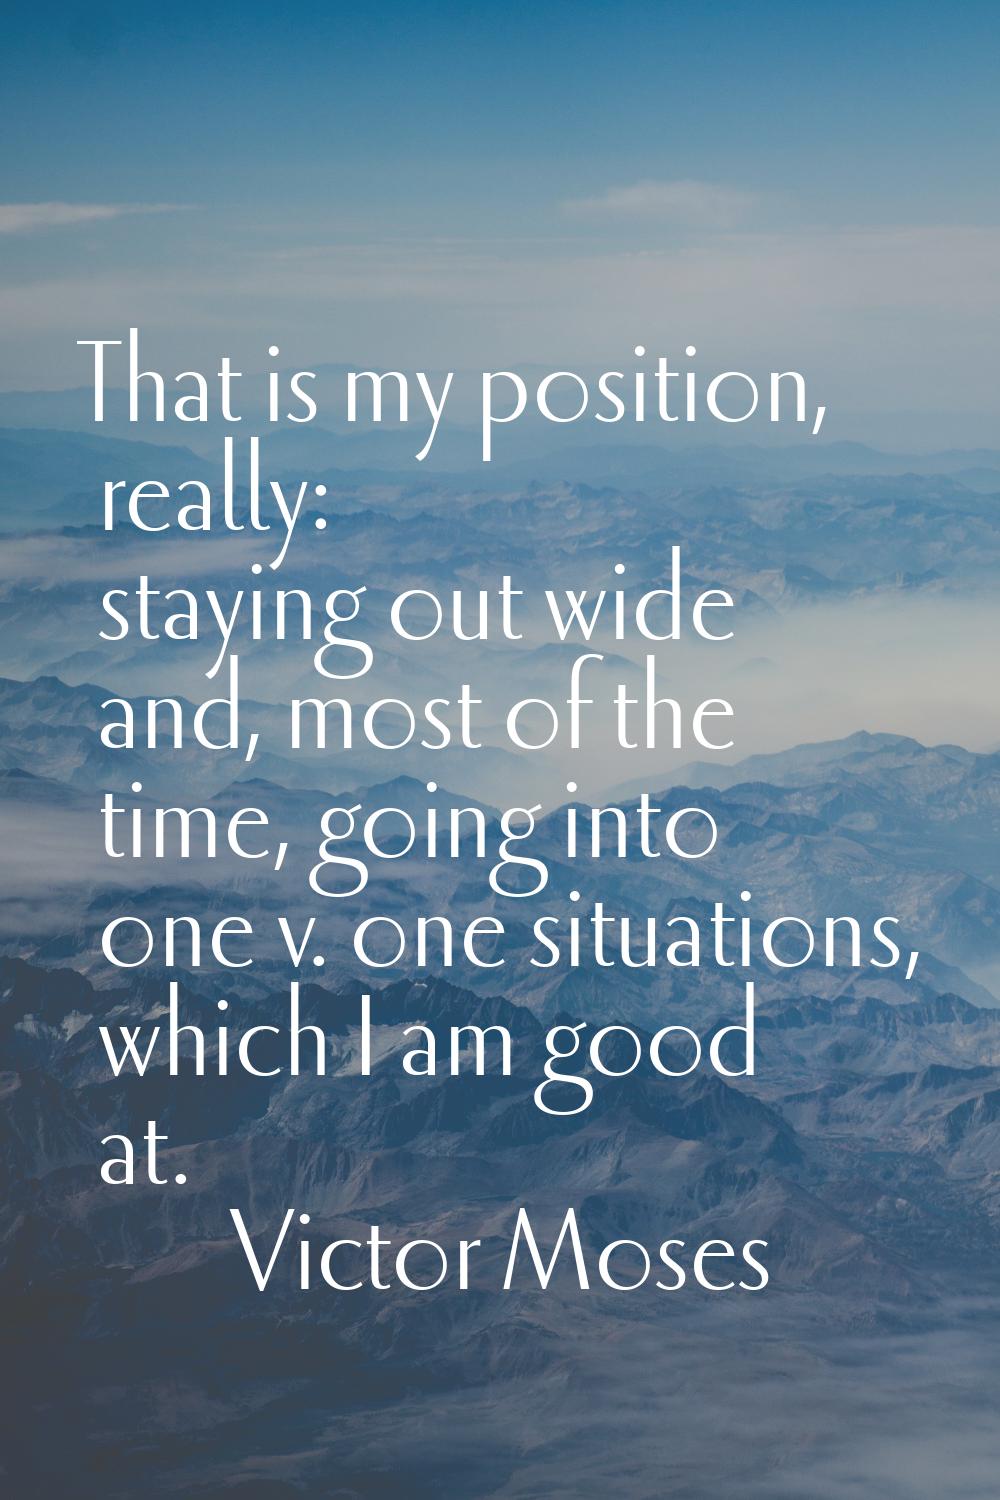 That is my position, really: staying out wide and, most of the time, going into one v. one situatio